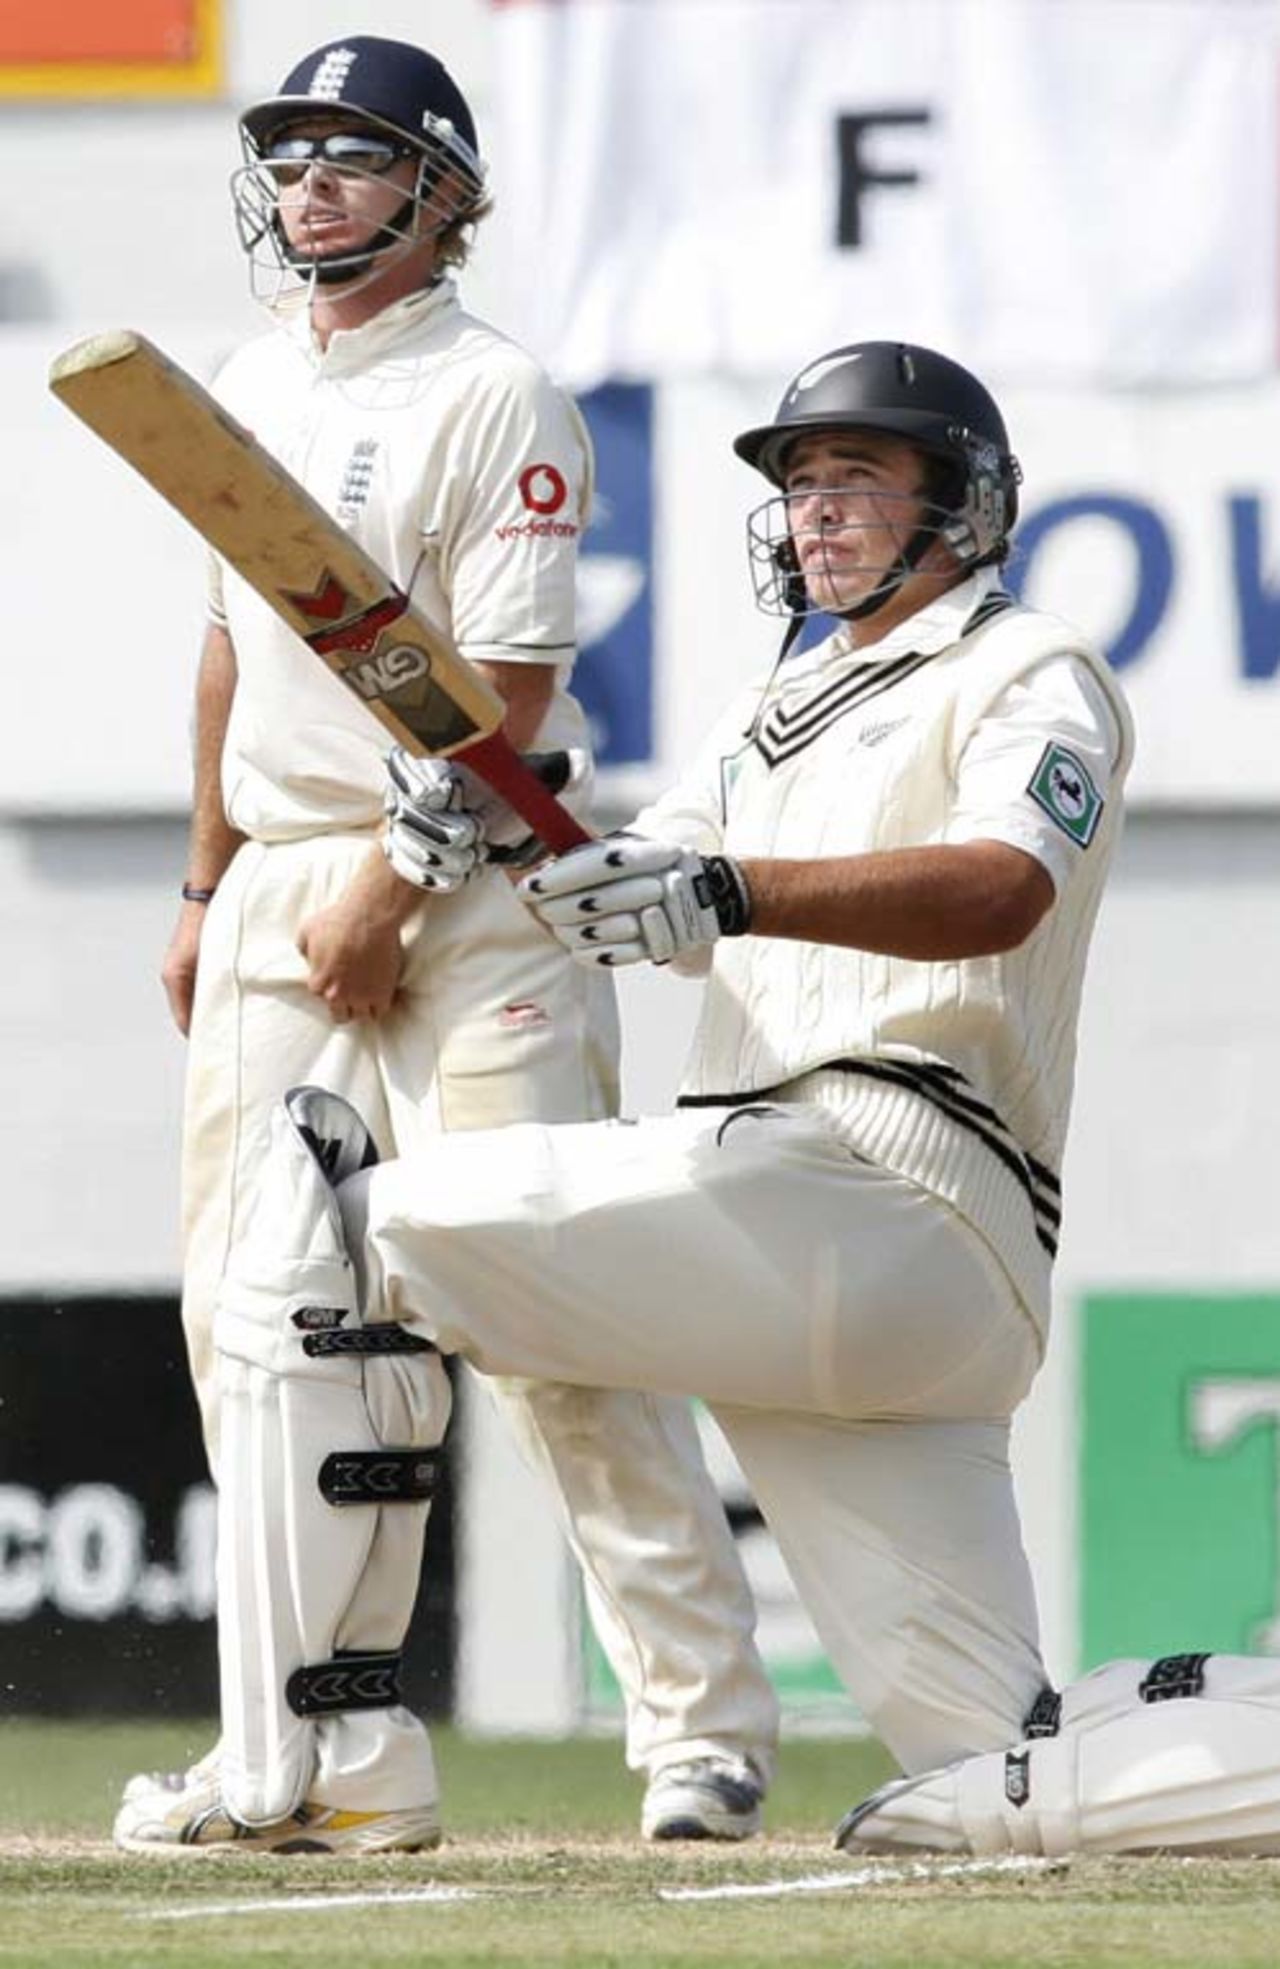 Tim Southee heaves it over the midwicket boundary, New Zealand v England, 3rd Test, Napier, March 26, 2008